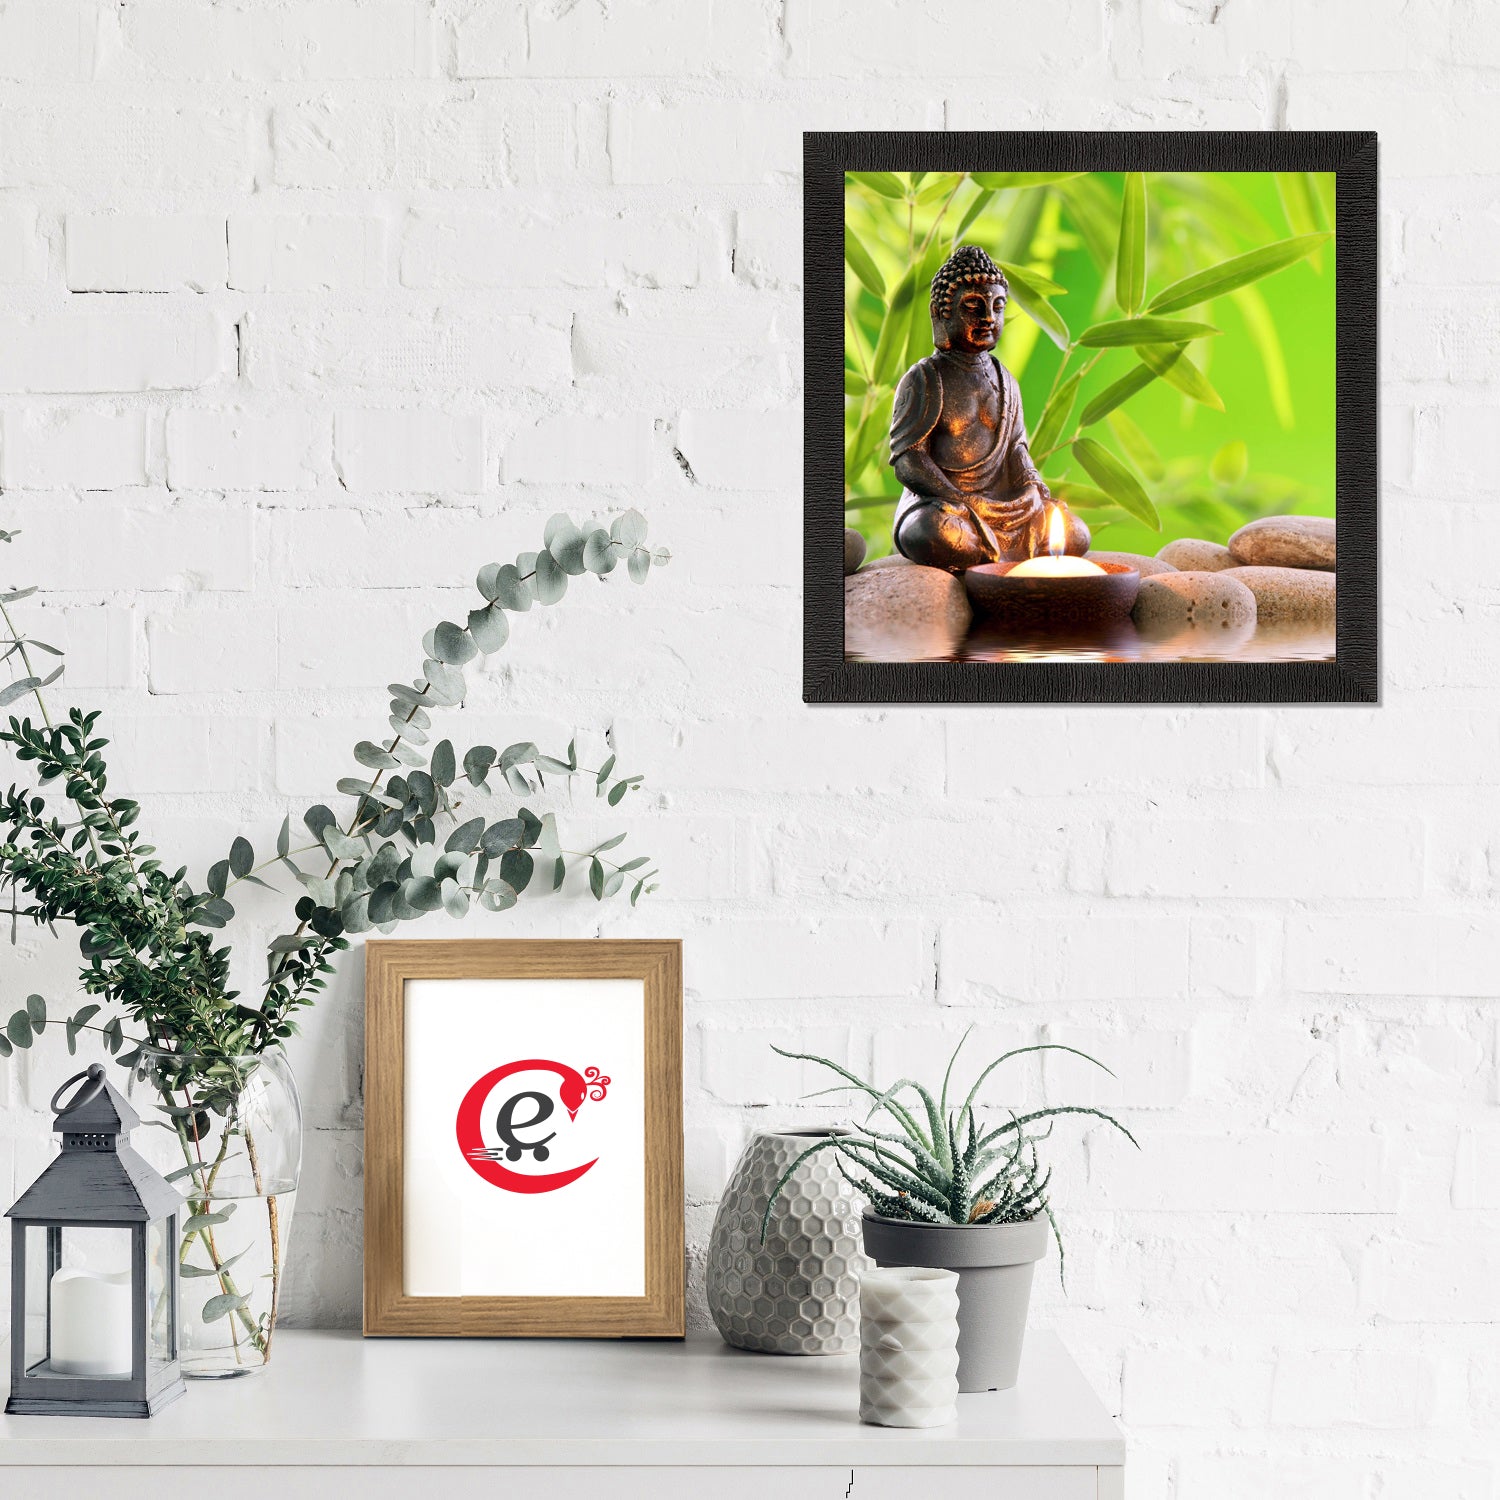 Meditating Lord Buddha Painting With Candle Digital Printed Religious Wall Art 1